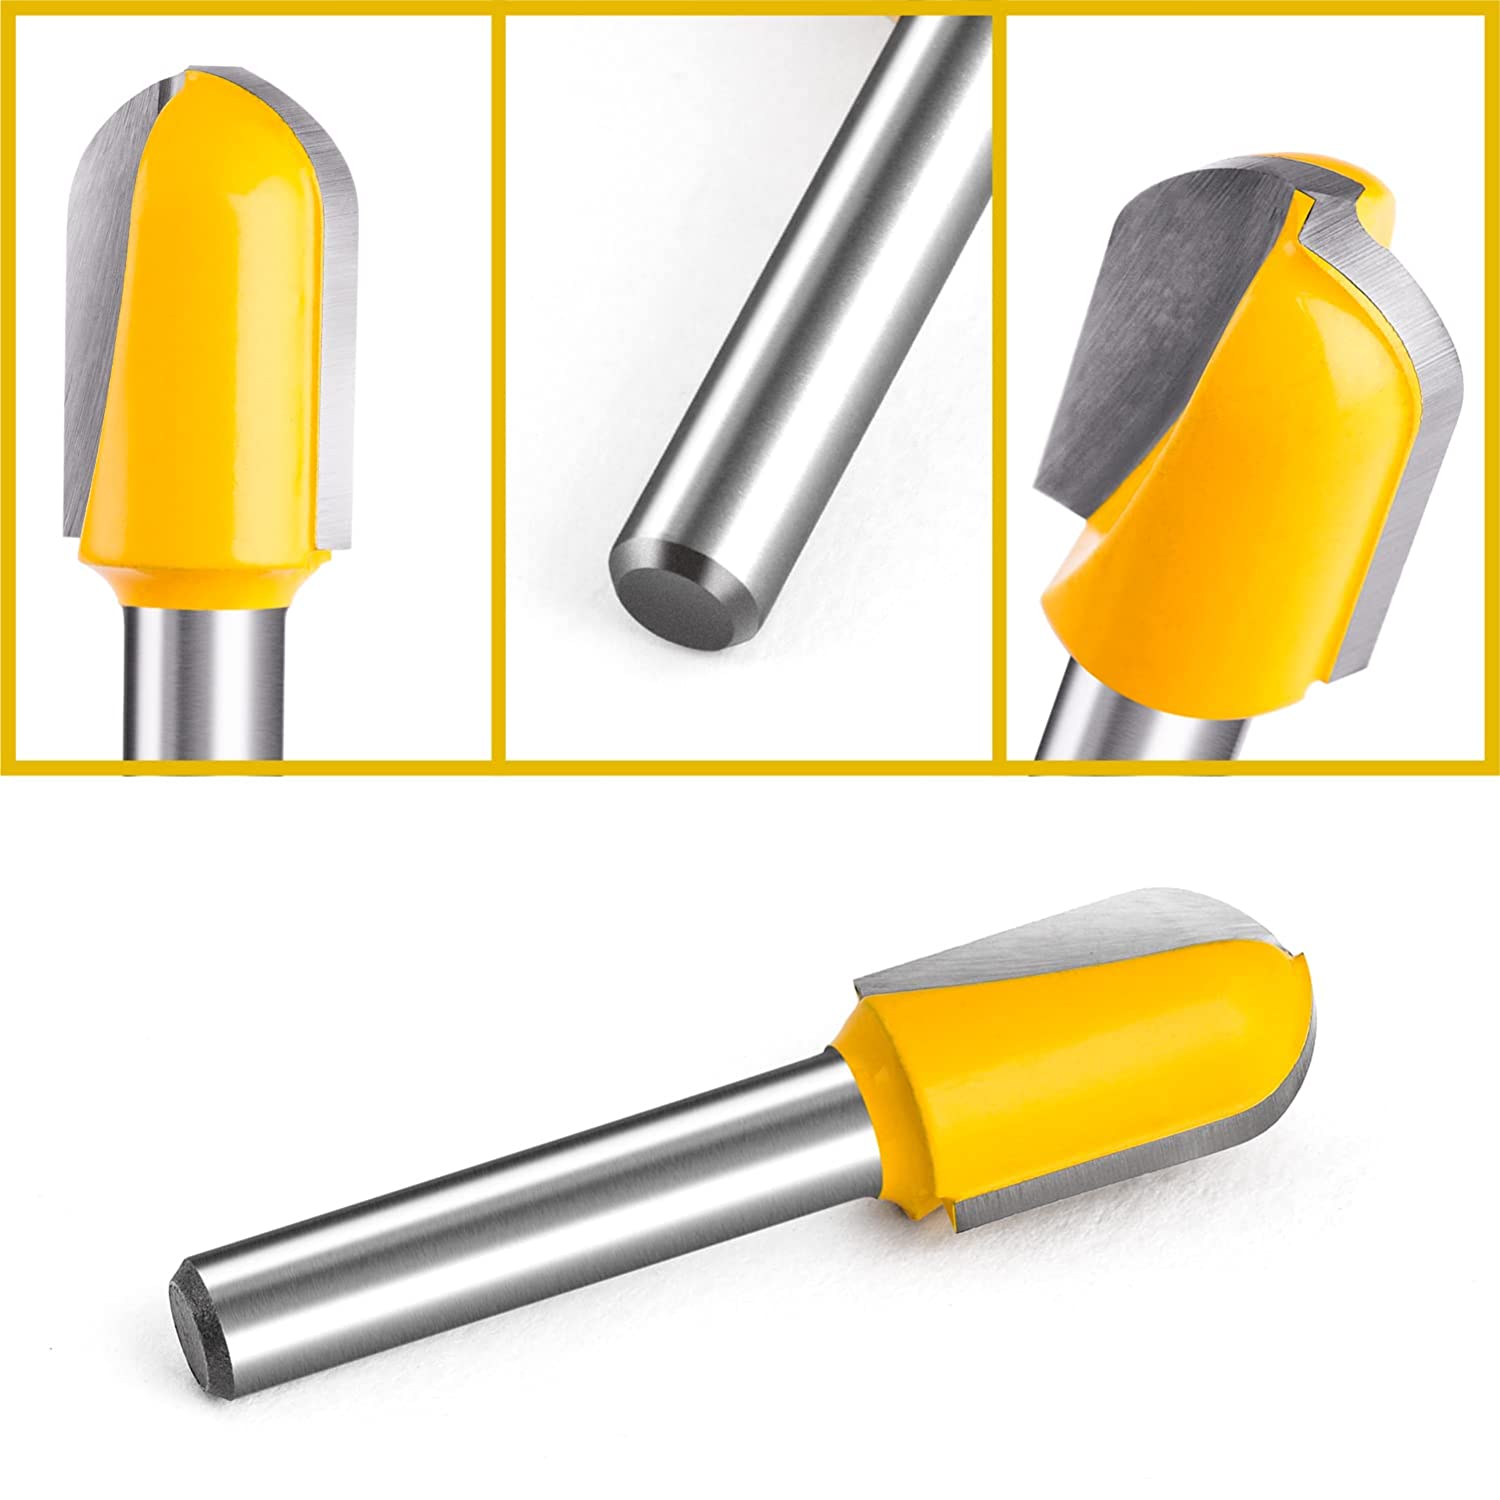 AugTouf Router Bit Set 1/4" Shank Round Router Bit, Cutting Dia Single Straight Flute Carbide for Woodworking Carpentry